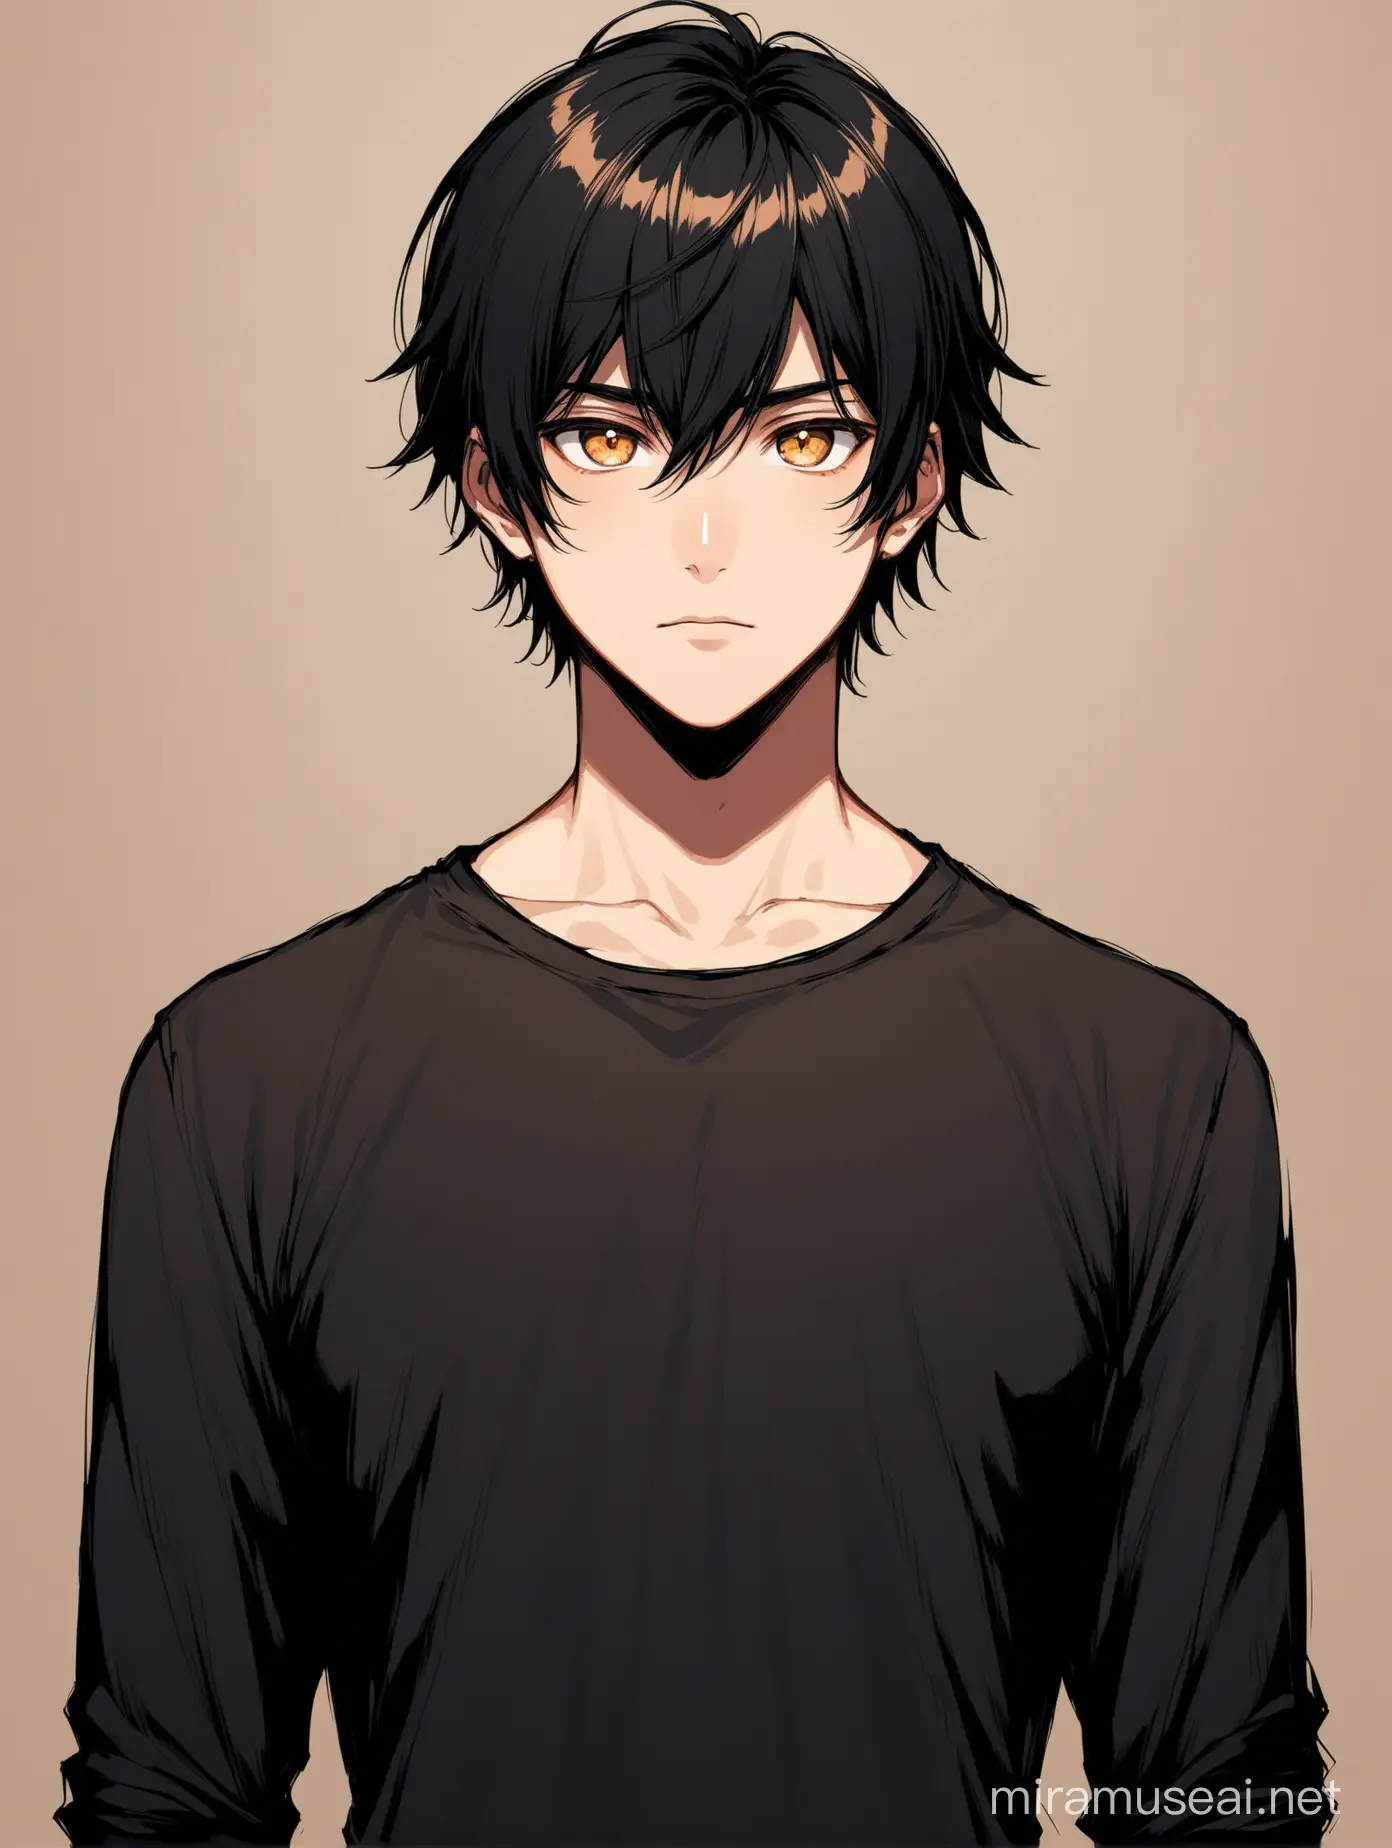 Confident Male Character Portrait with Sharp Black Hair and Honey Brown Eyes